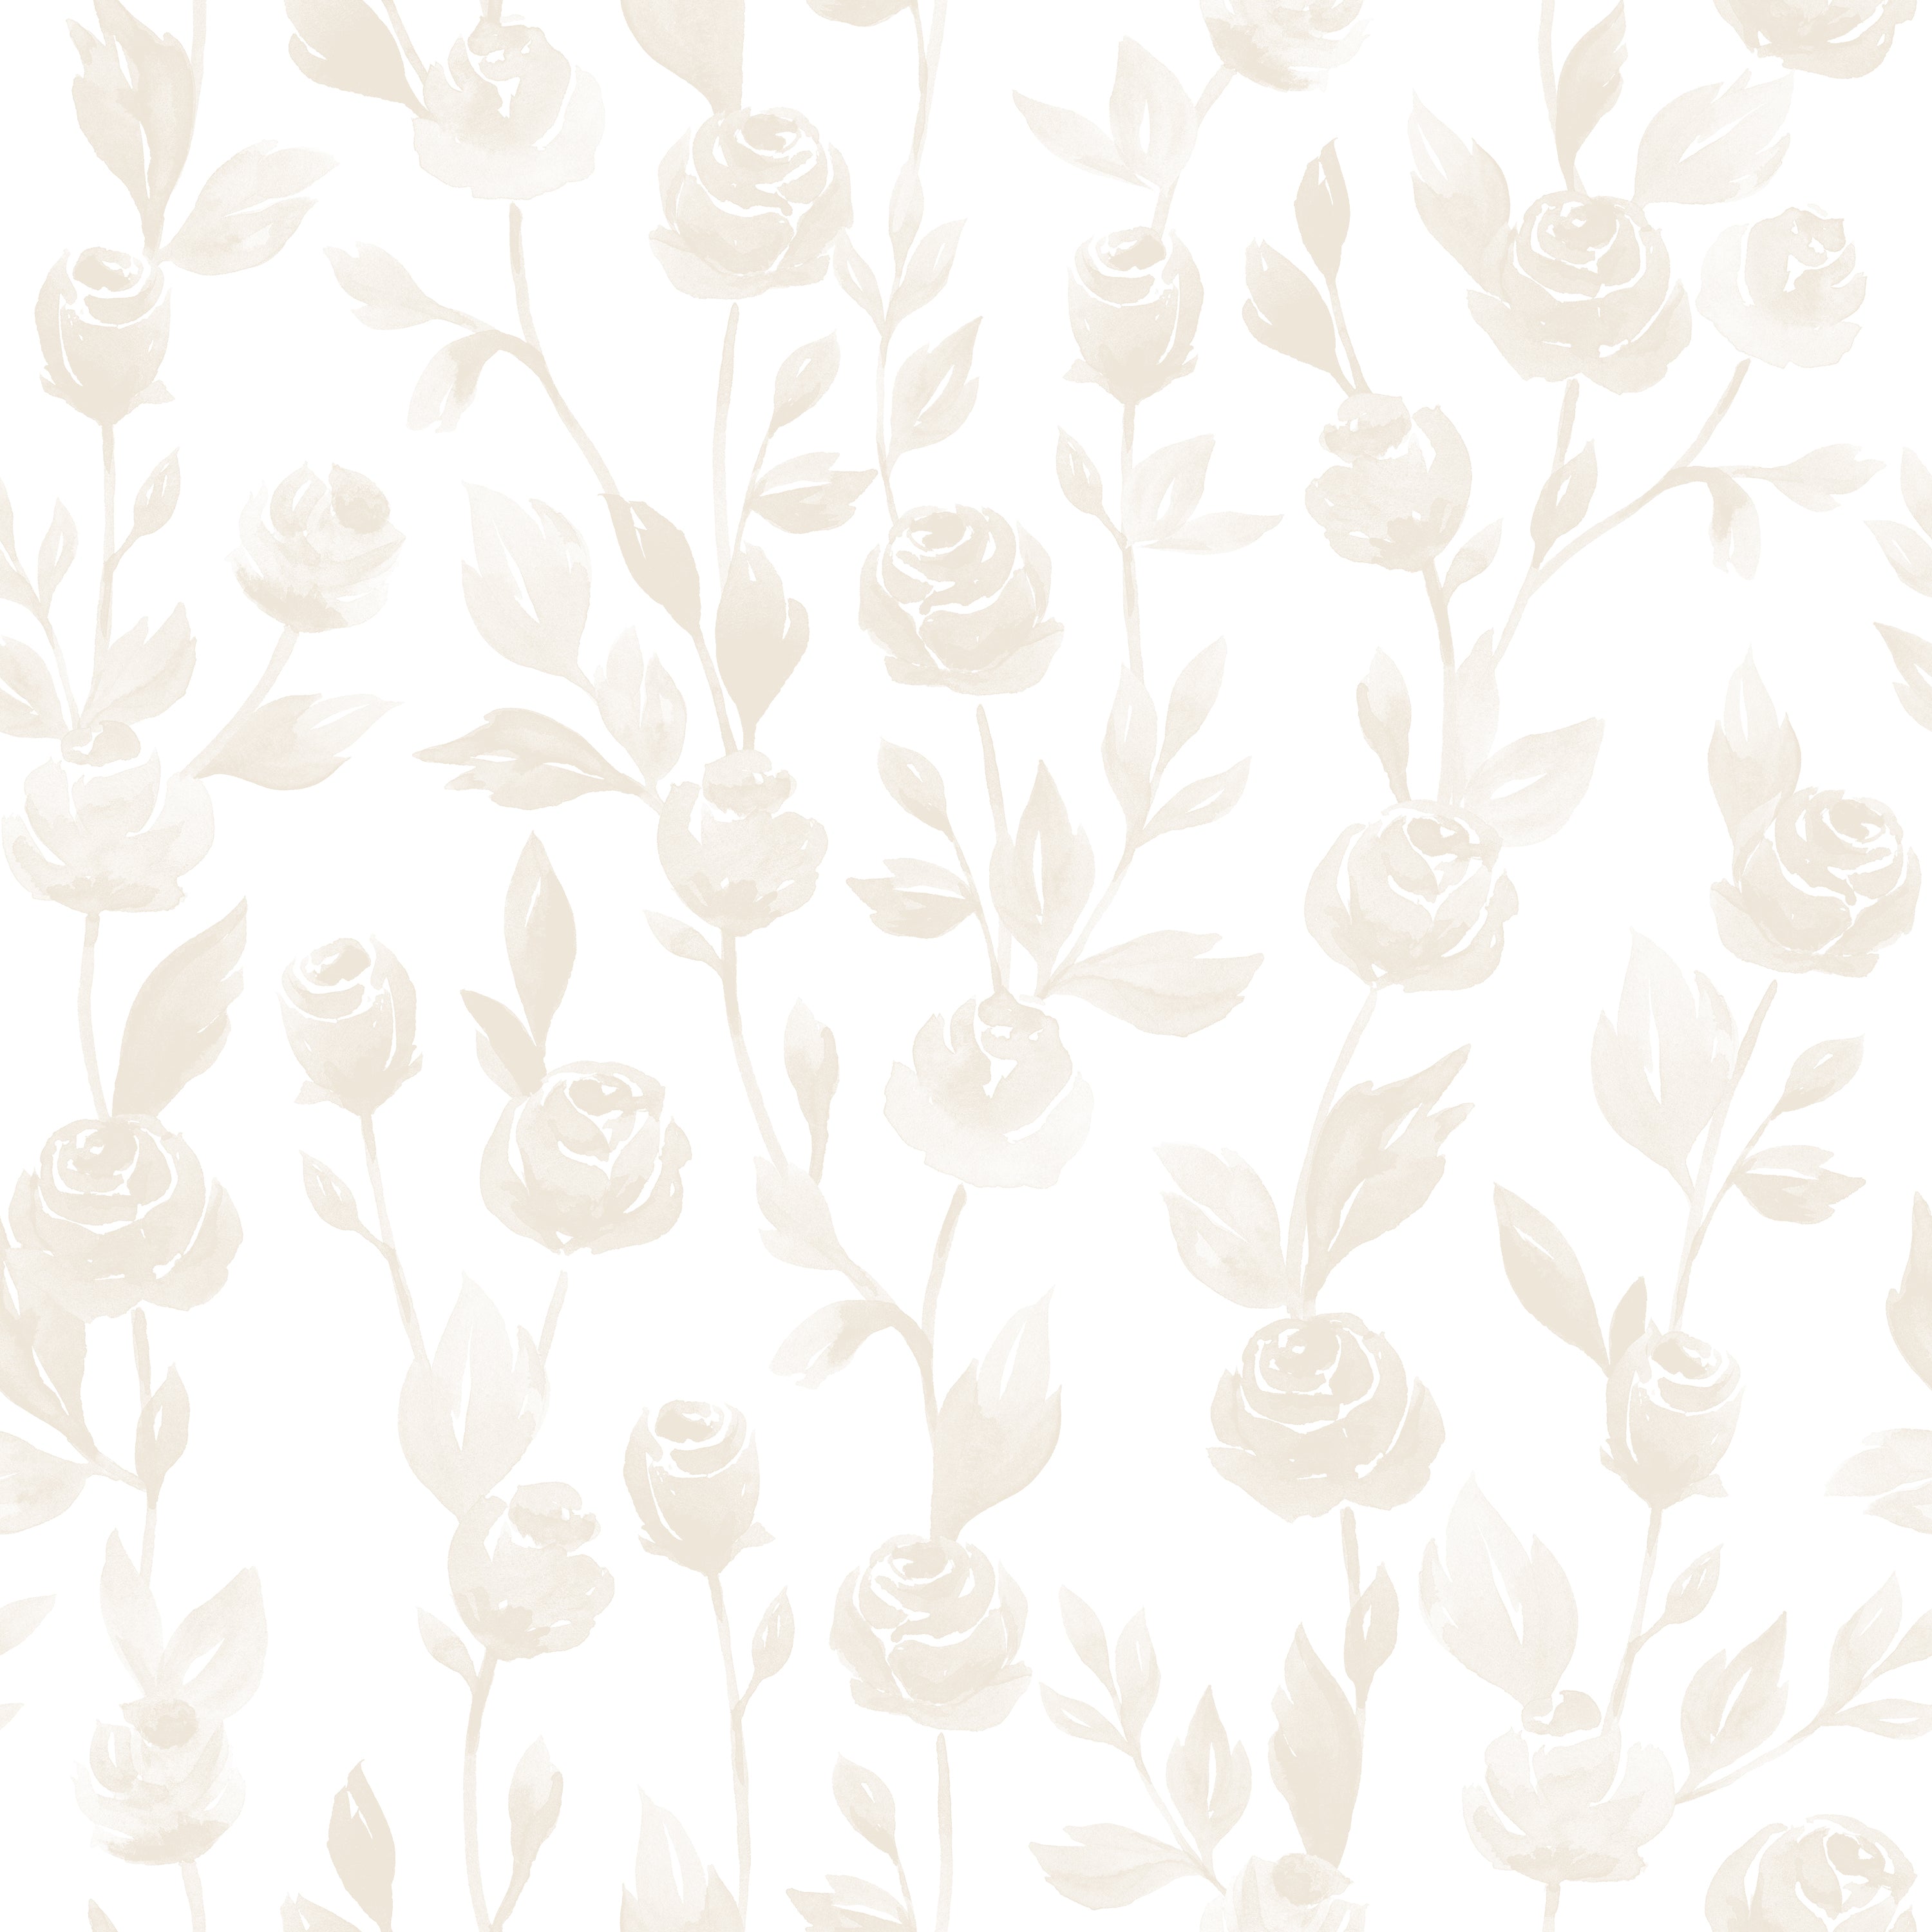  A detailed shot of the Cream Watercolour Rose Wallpaper, showcasing its delicate rose and leaf designs in a monochromatic scheme, ideal for adding a subtle touch of nature to any room.